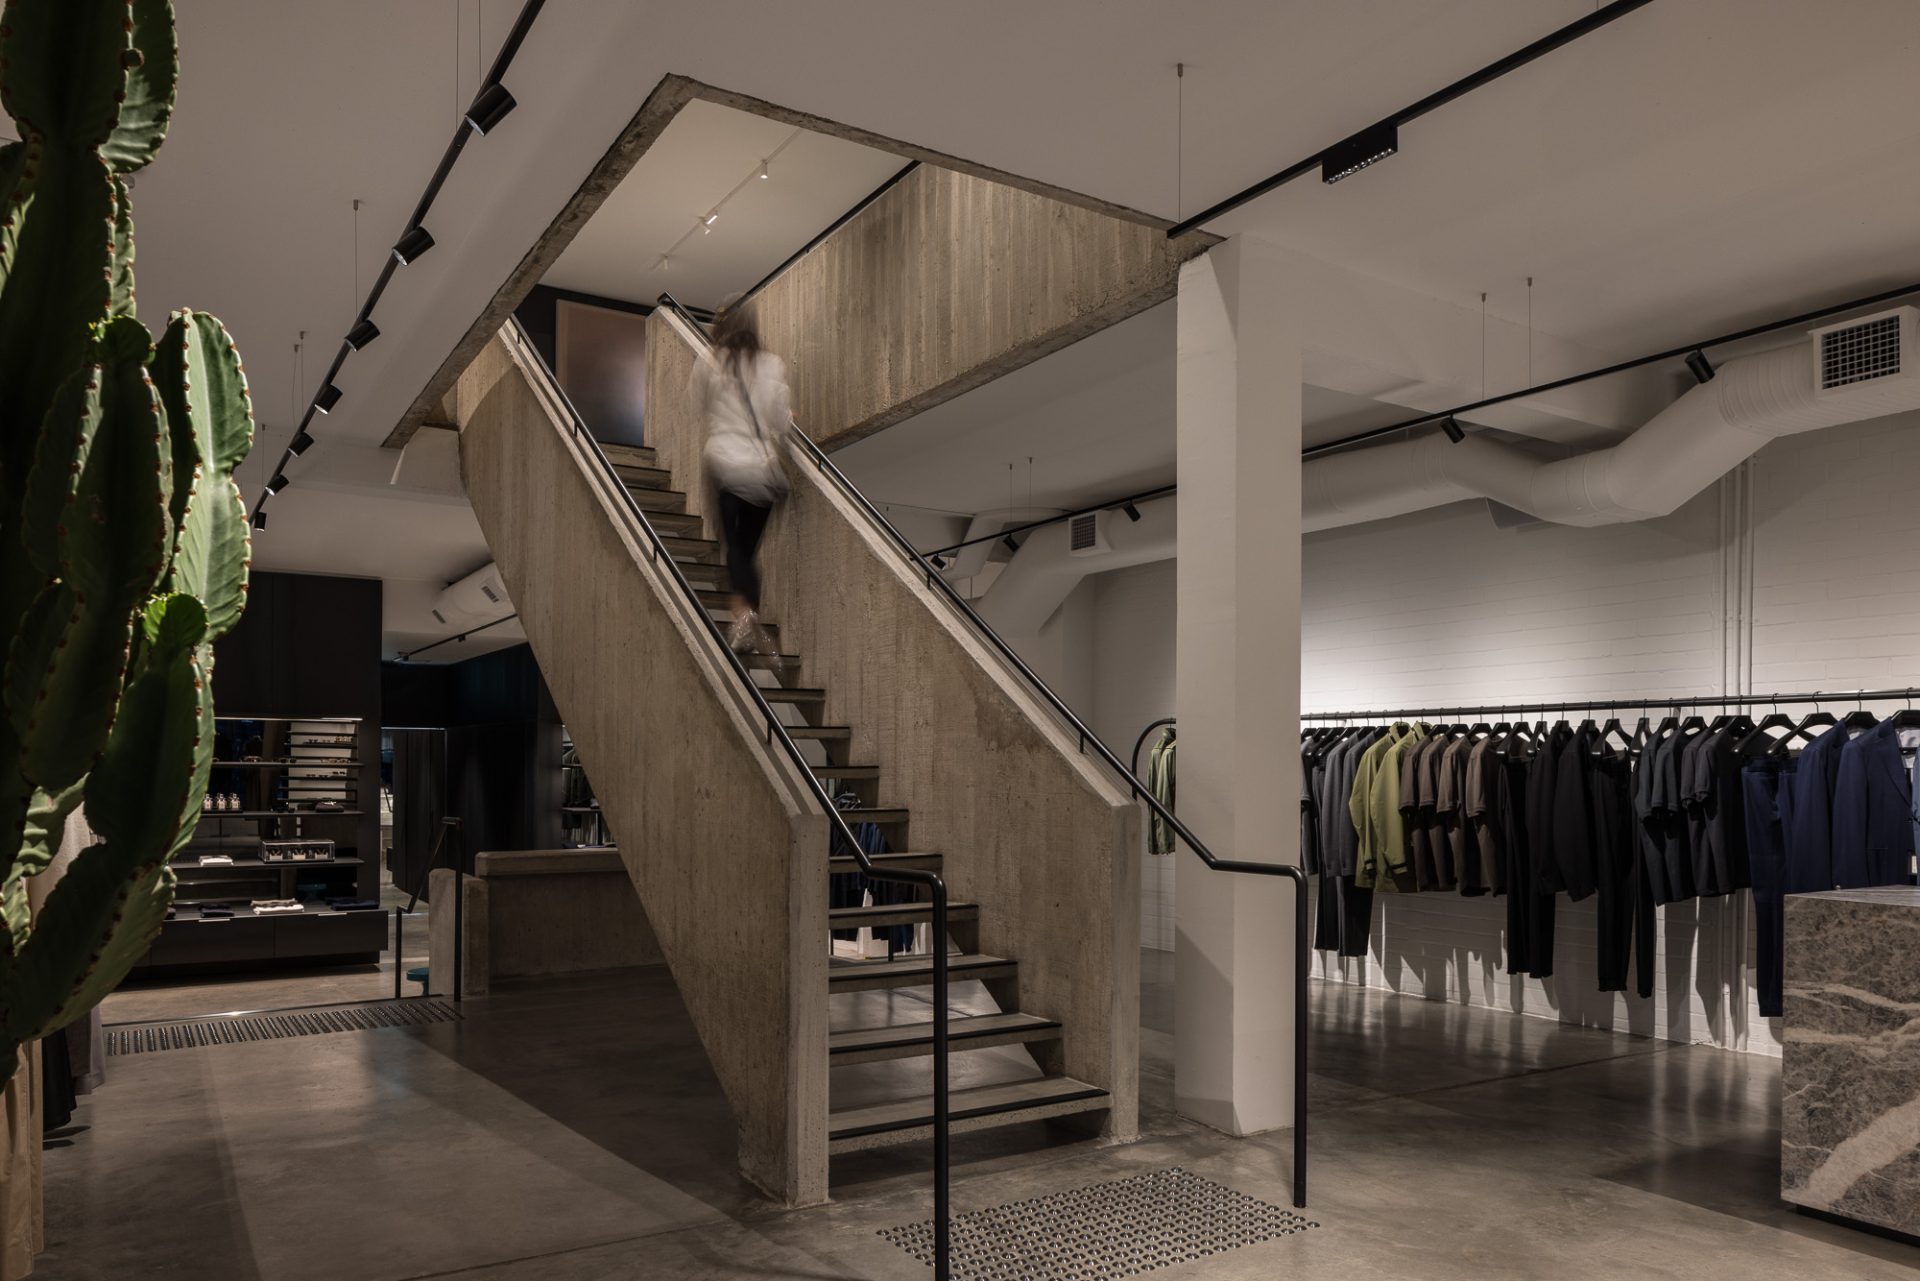 Farage Concept Store features iGuzzini Laser Blade XS, Trick 180 and Palco Low Voltage